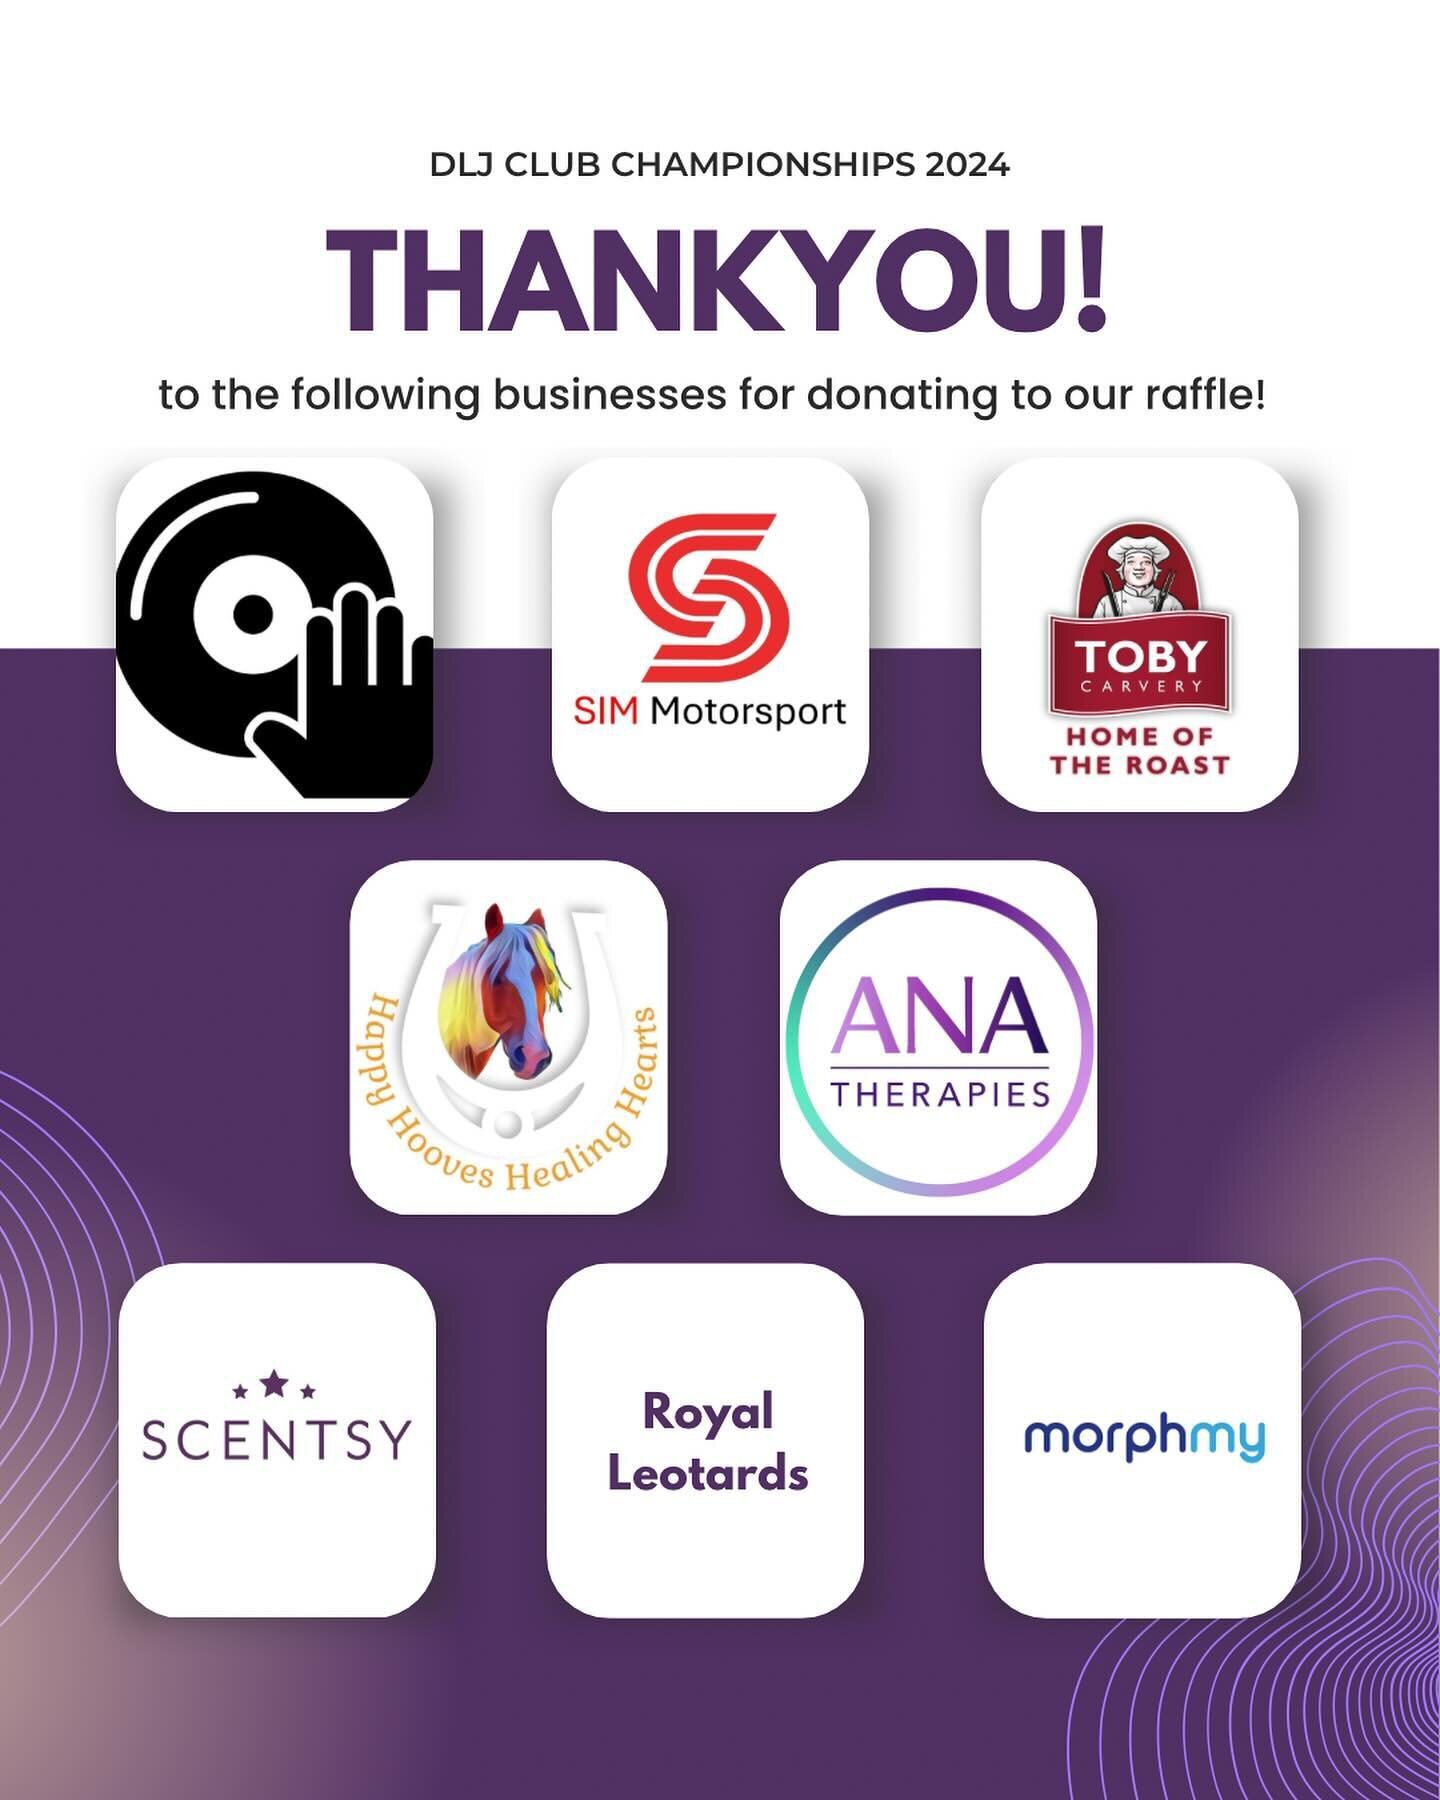 Only 1 more sleep until the DLJ Club Championships!! 😱

We want to say a massive THANKYOU to these businesses for supporting our club and donating a prize to our raffle for tomorrow&rsquo;s event! 🙌

Double tap to say thankyou!
Go give them a follo